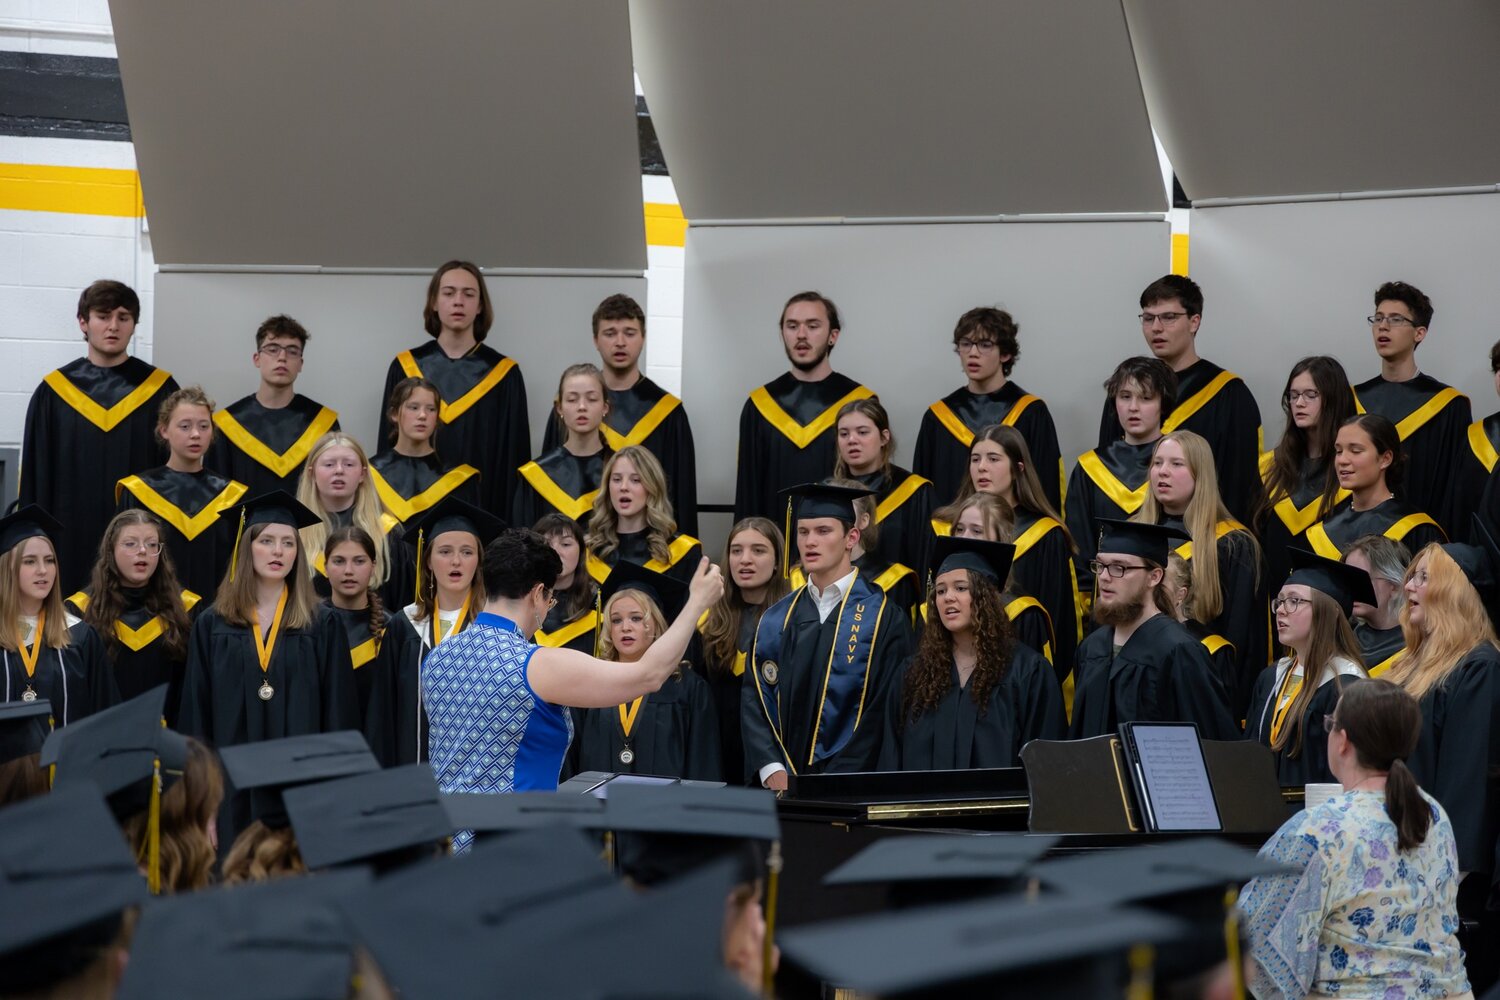 The High School Choir perform “Time to Say Goodbye” at the graduation ceremony.